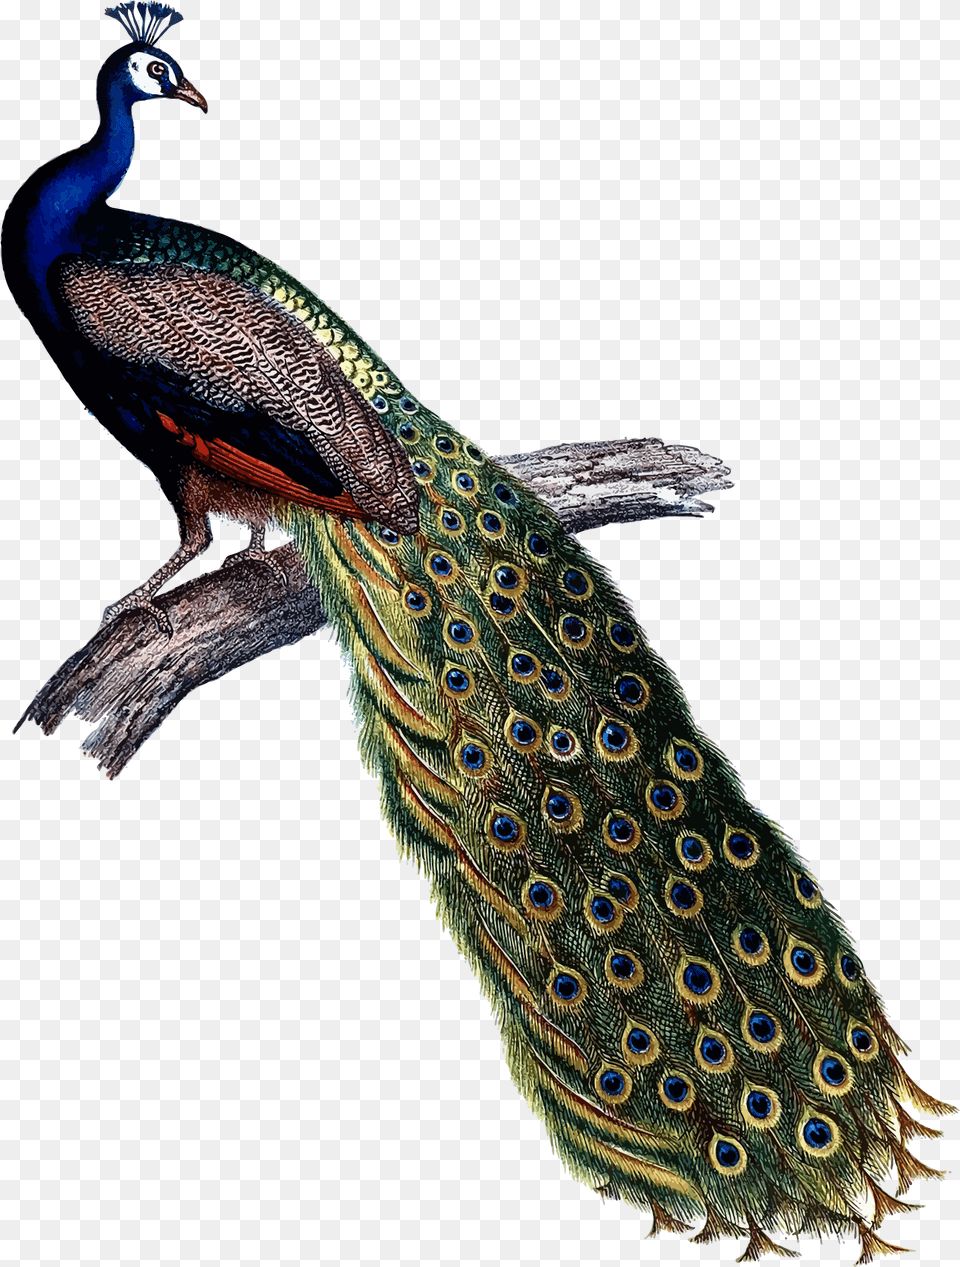 This Free Icons Design Of Indian Peacock, Animal, Bird Png